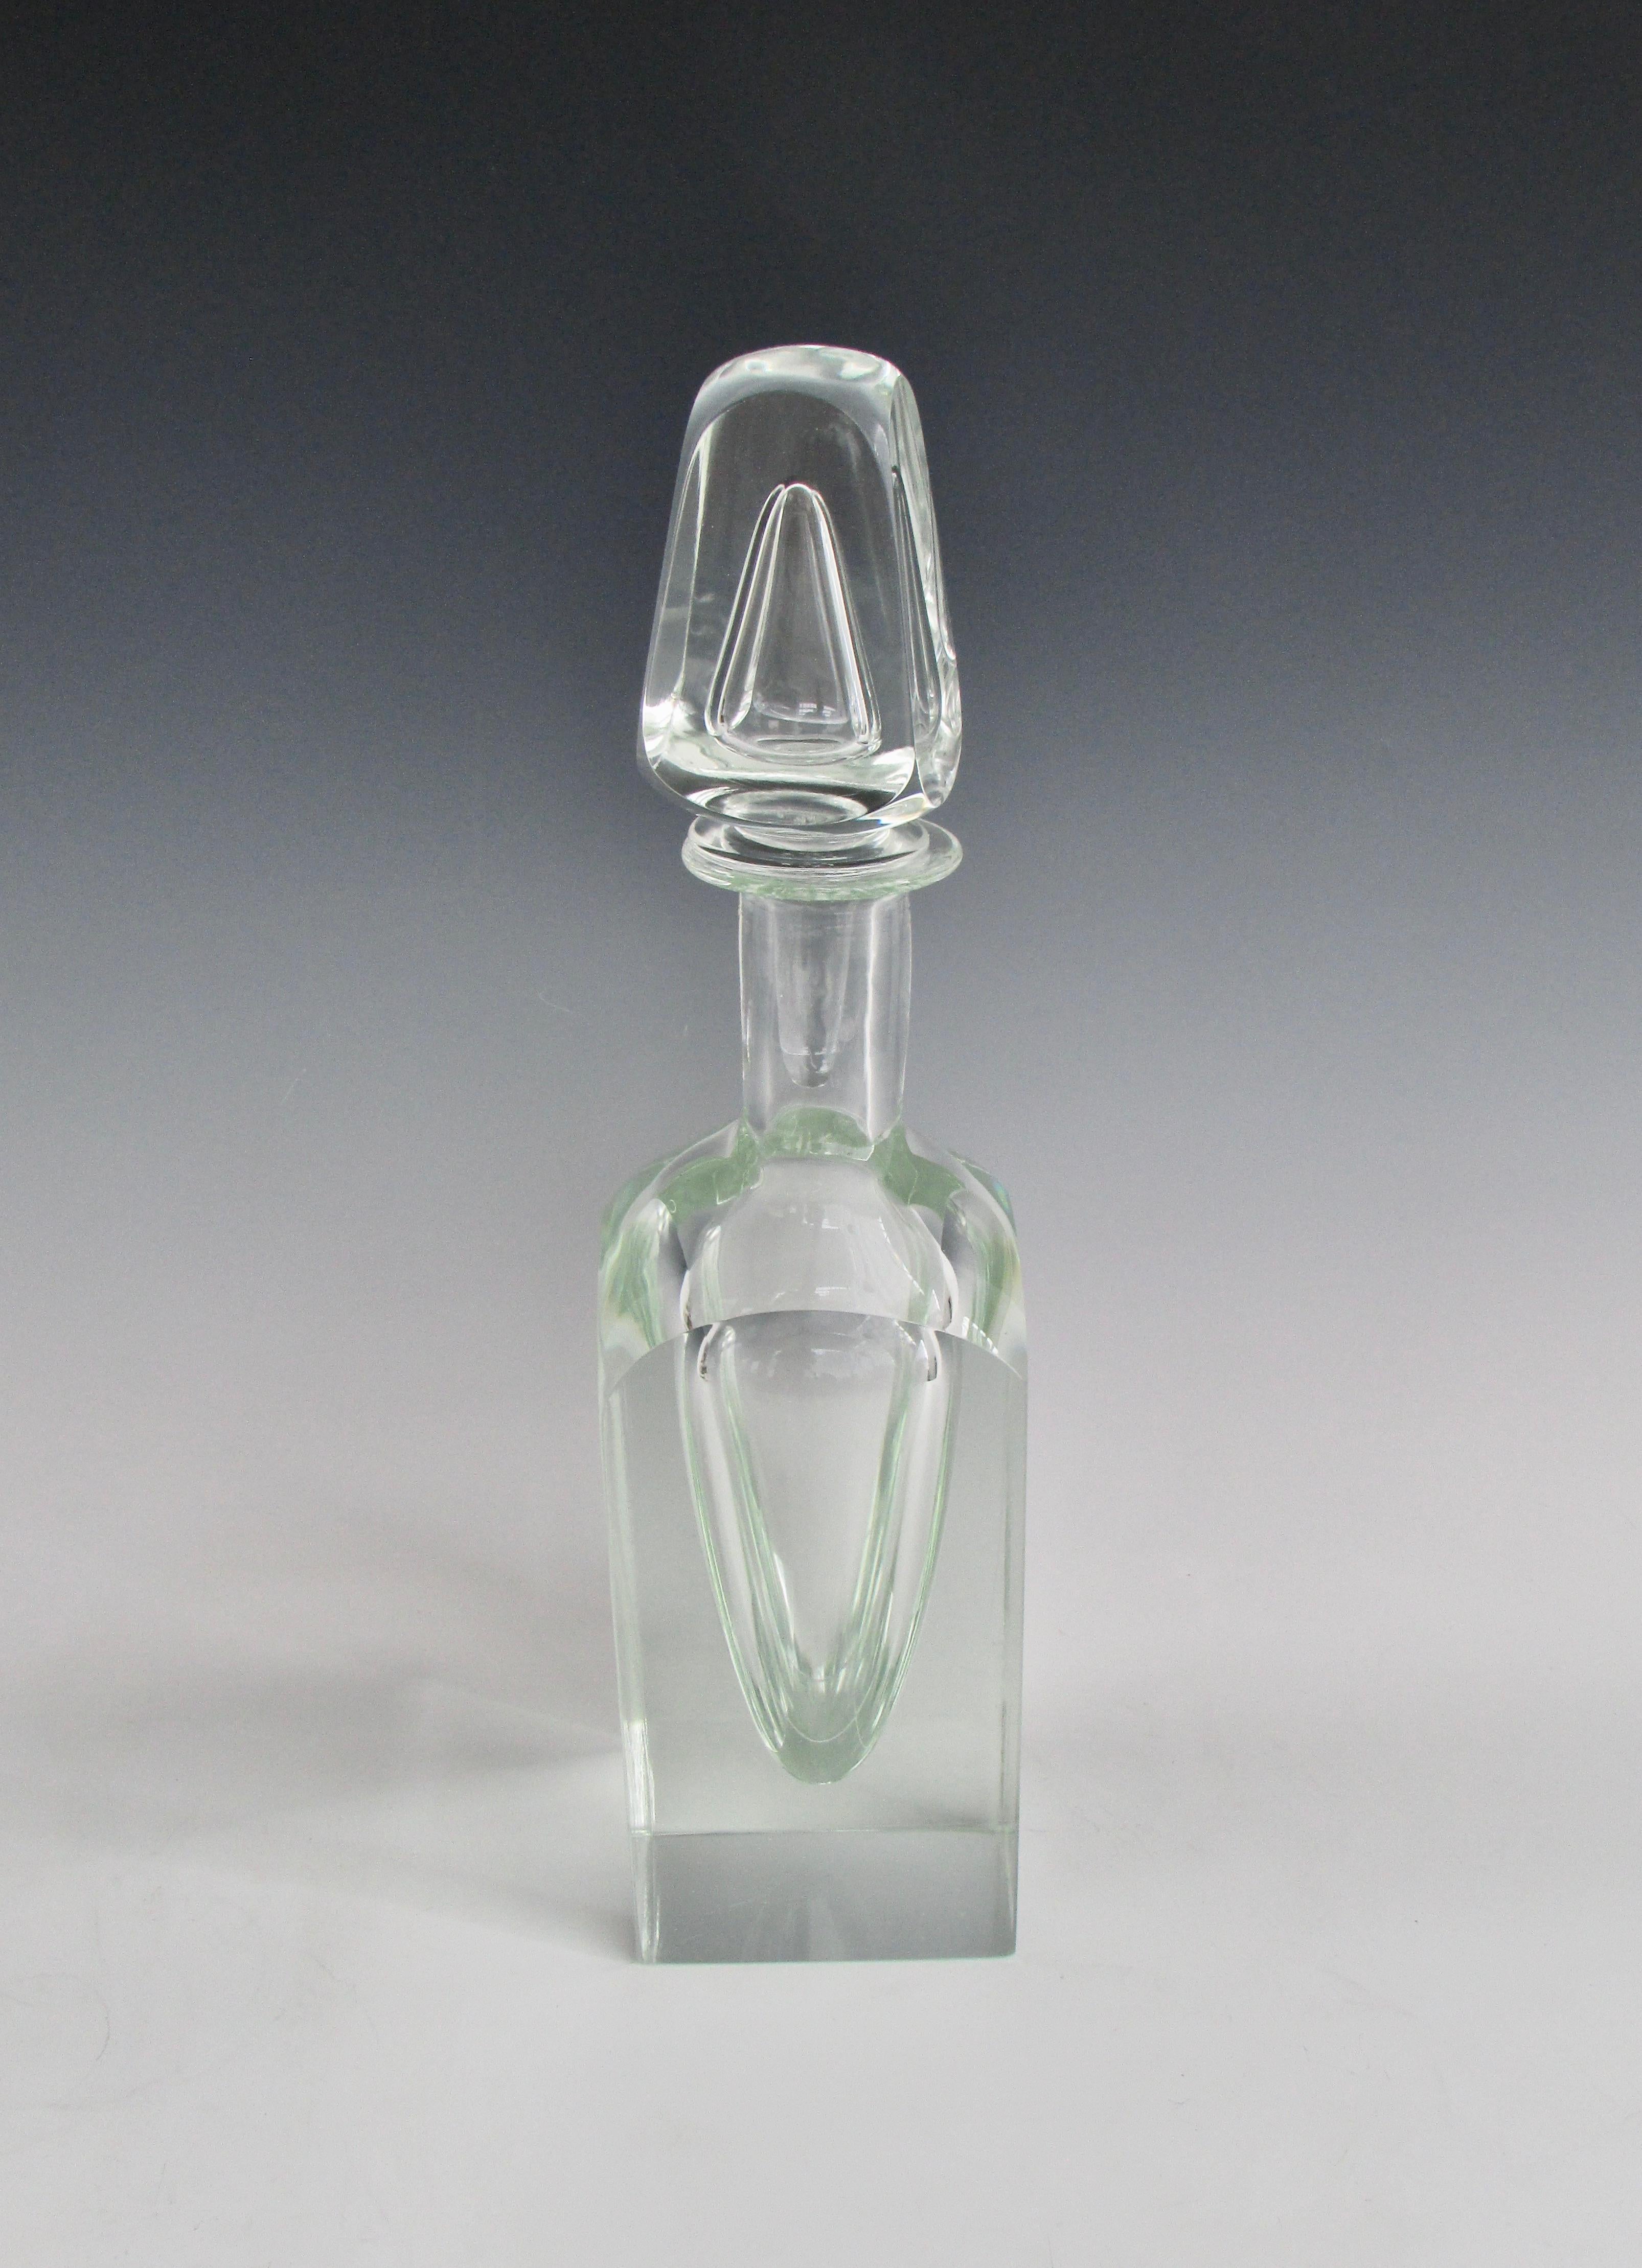 Large substantial piece of clear glass with equally impressive stopper. I see a strong post modern Memphis Milano look.